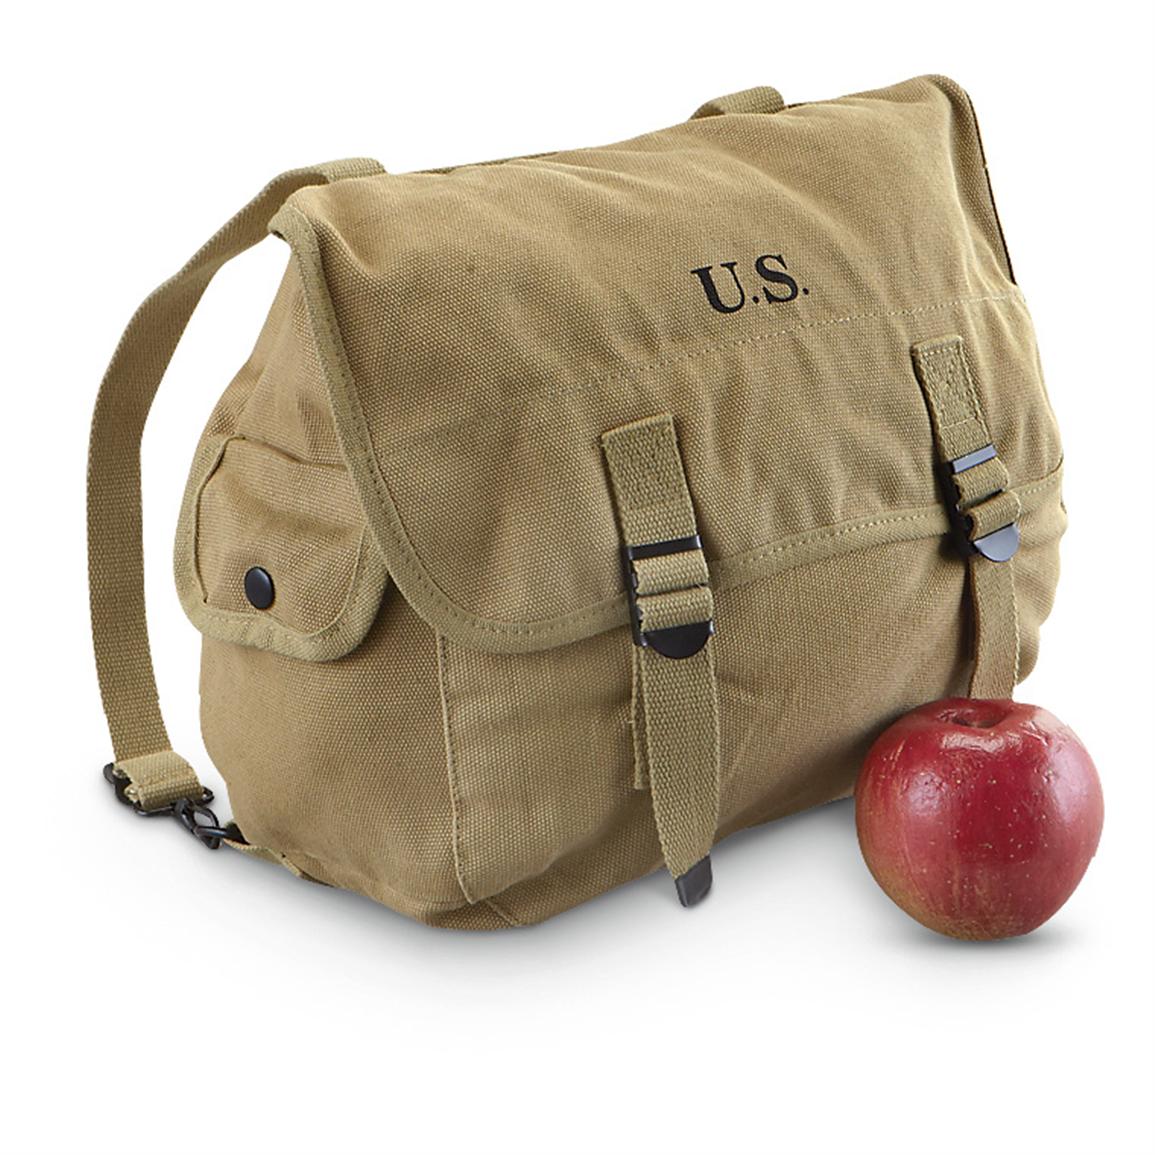 WWII Repro U.S. Military Musette Bag, Khaki - 203248, Military Field Gear at Sportsman&#39;s Guide